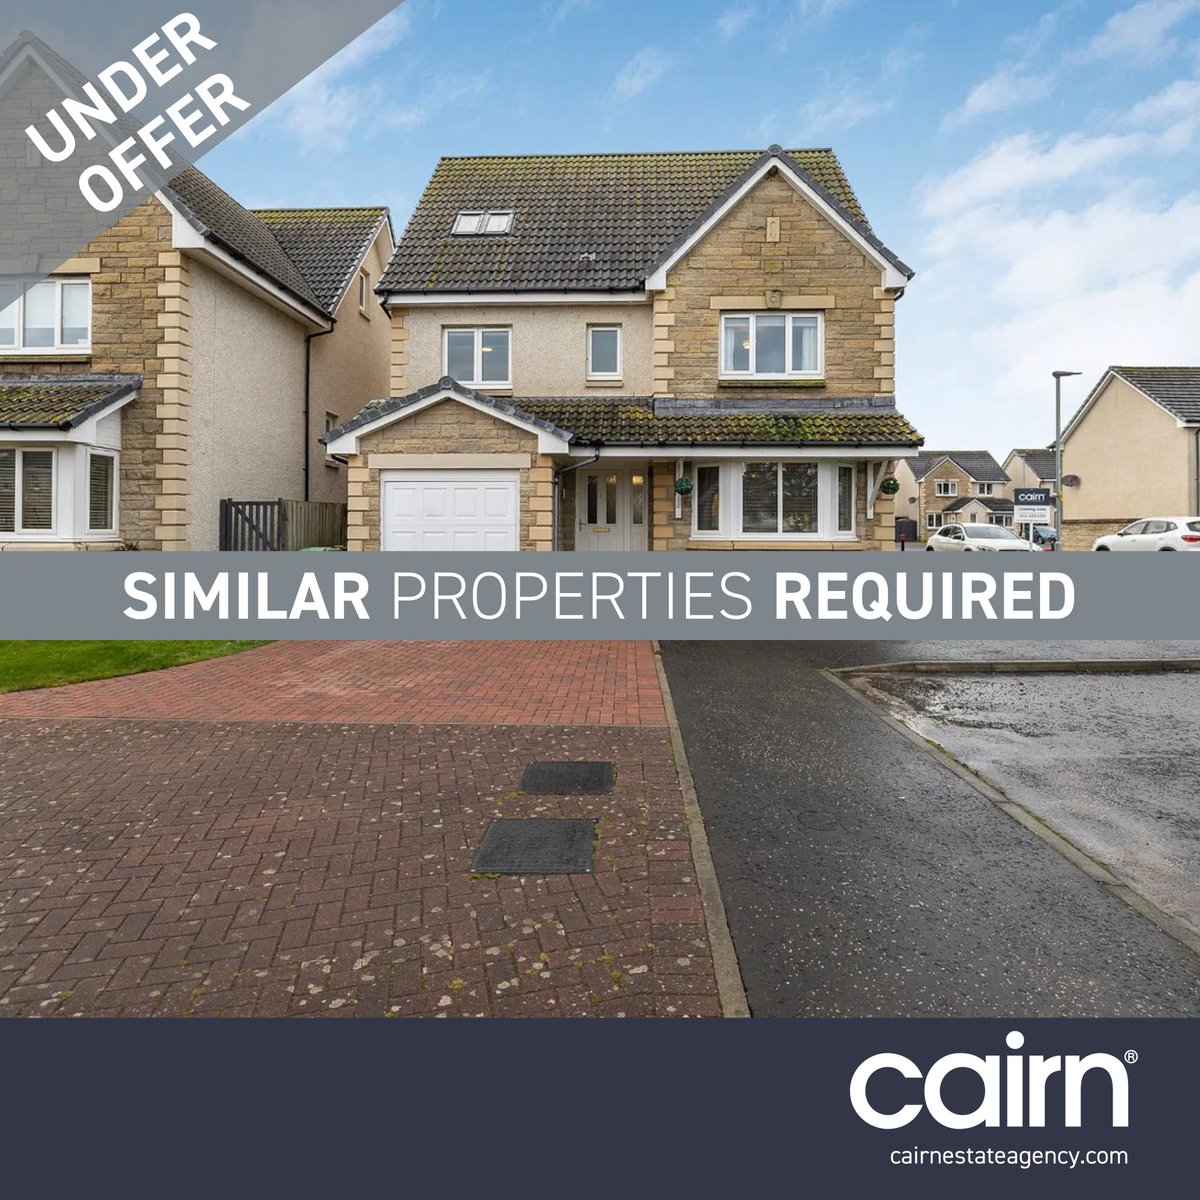 Are you looking to sell your property ? 

Our team are on hand to guide you through the process, for free no obligation valuation call 0141 270 7878 or 0131 622 6215 or enquiries@cairnsales.com 

@rightmoveuk @zoopla.uk @OnTheMarketCom #Eastlothian #Tranent